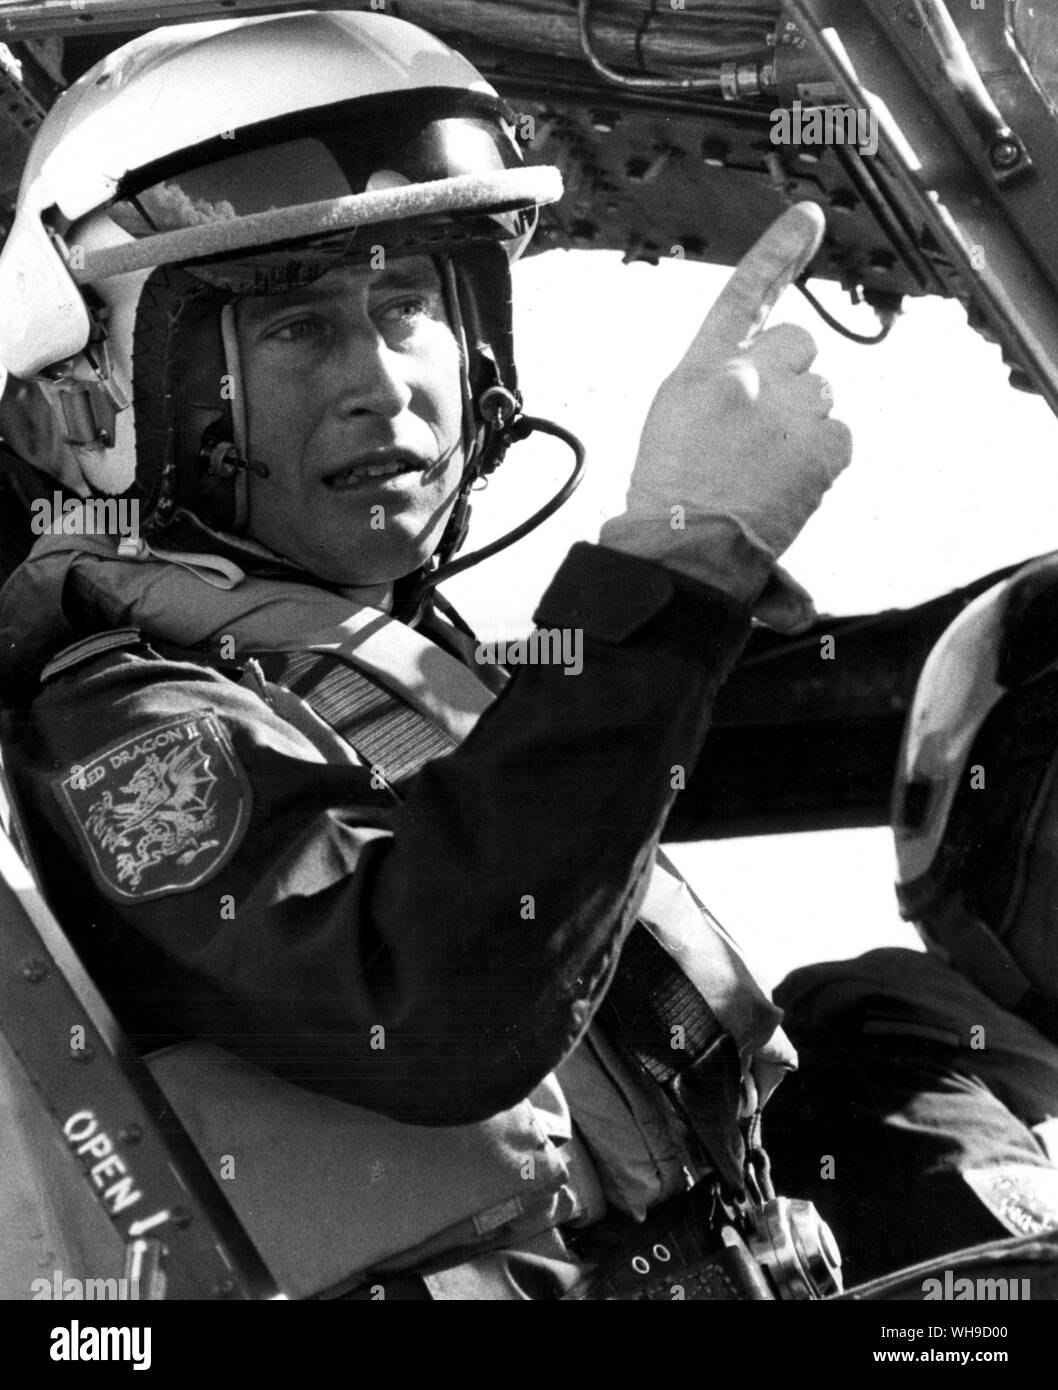 September 1974: Prince Charles, son of Queen Elizabeth of Great Britain and Northern Ireland. Naval Lieutenanrt Charles reconnoitres the controls before going up for his first dual control flying lesson in a Royal Naval Wessex V helicopter at a Royal Navy Air Station in Yeovilton. Stock Photo